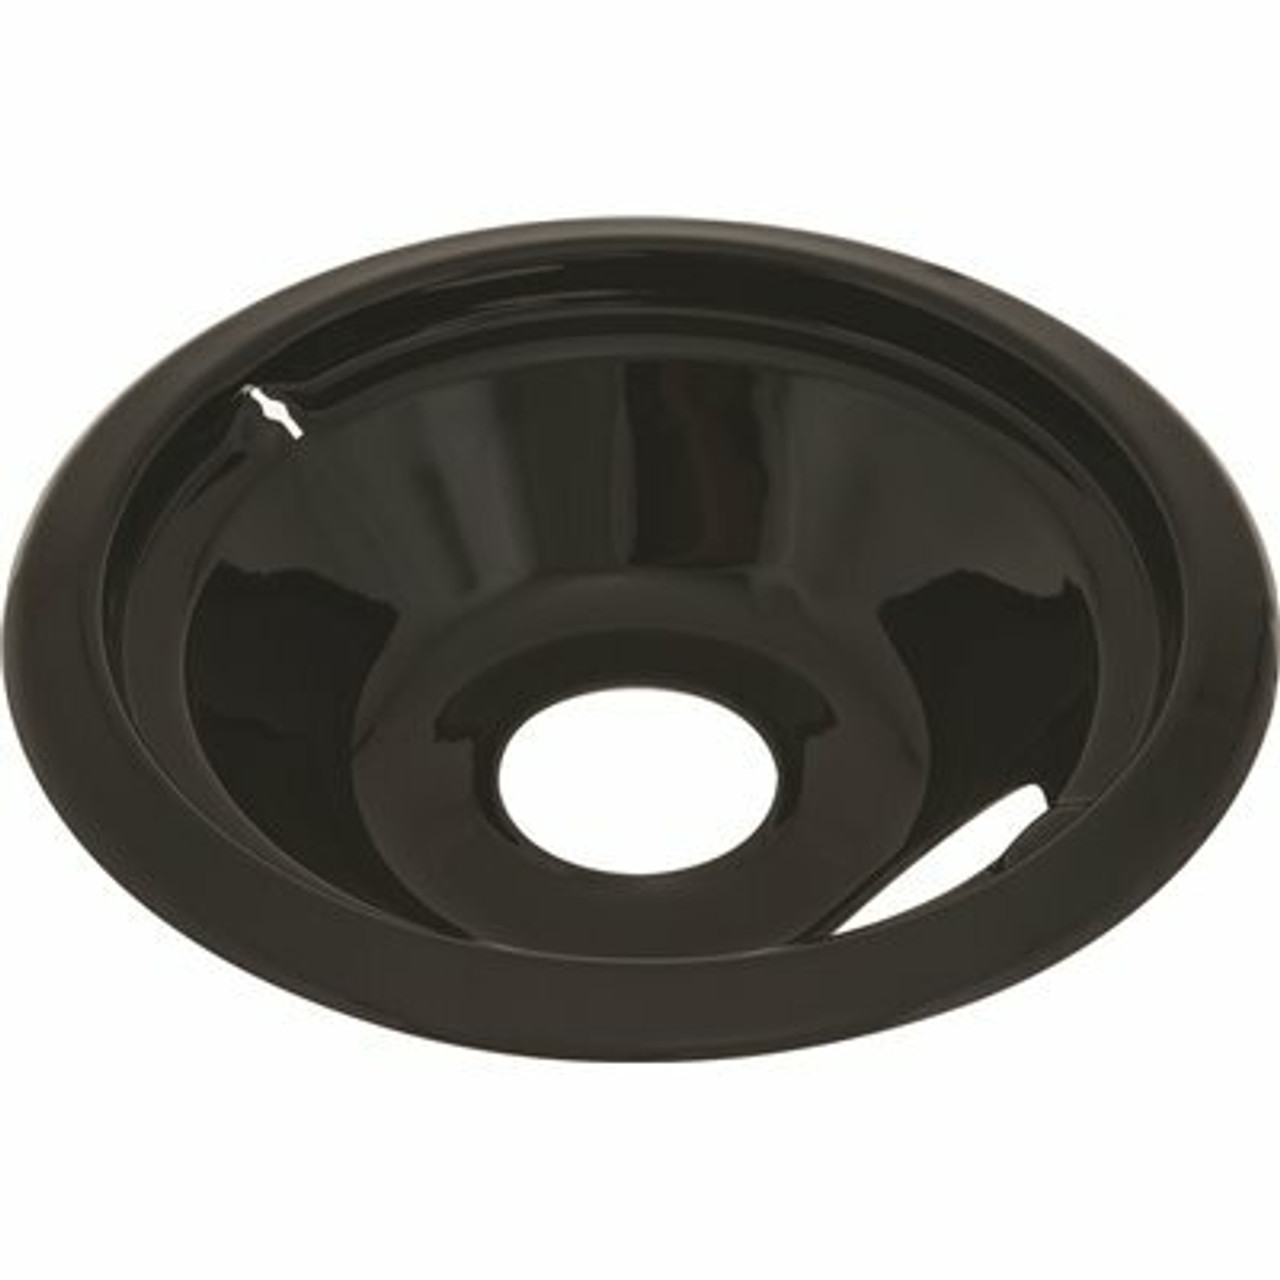 Porcelain-Coated 8 in. Drip Pan For Ge And Hotpoint Electric Ranges In Black (6-Pack)